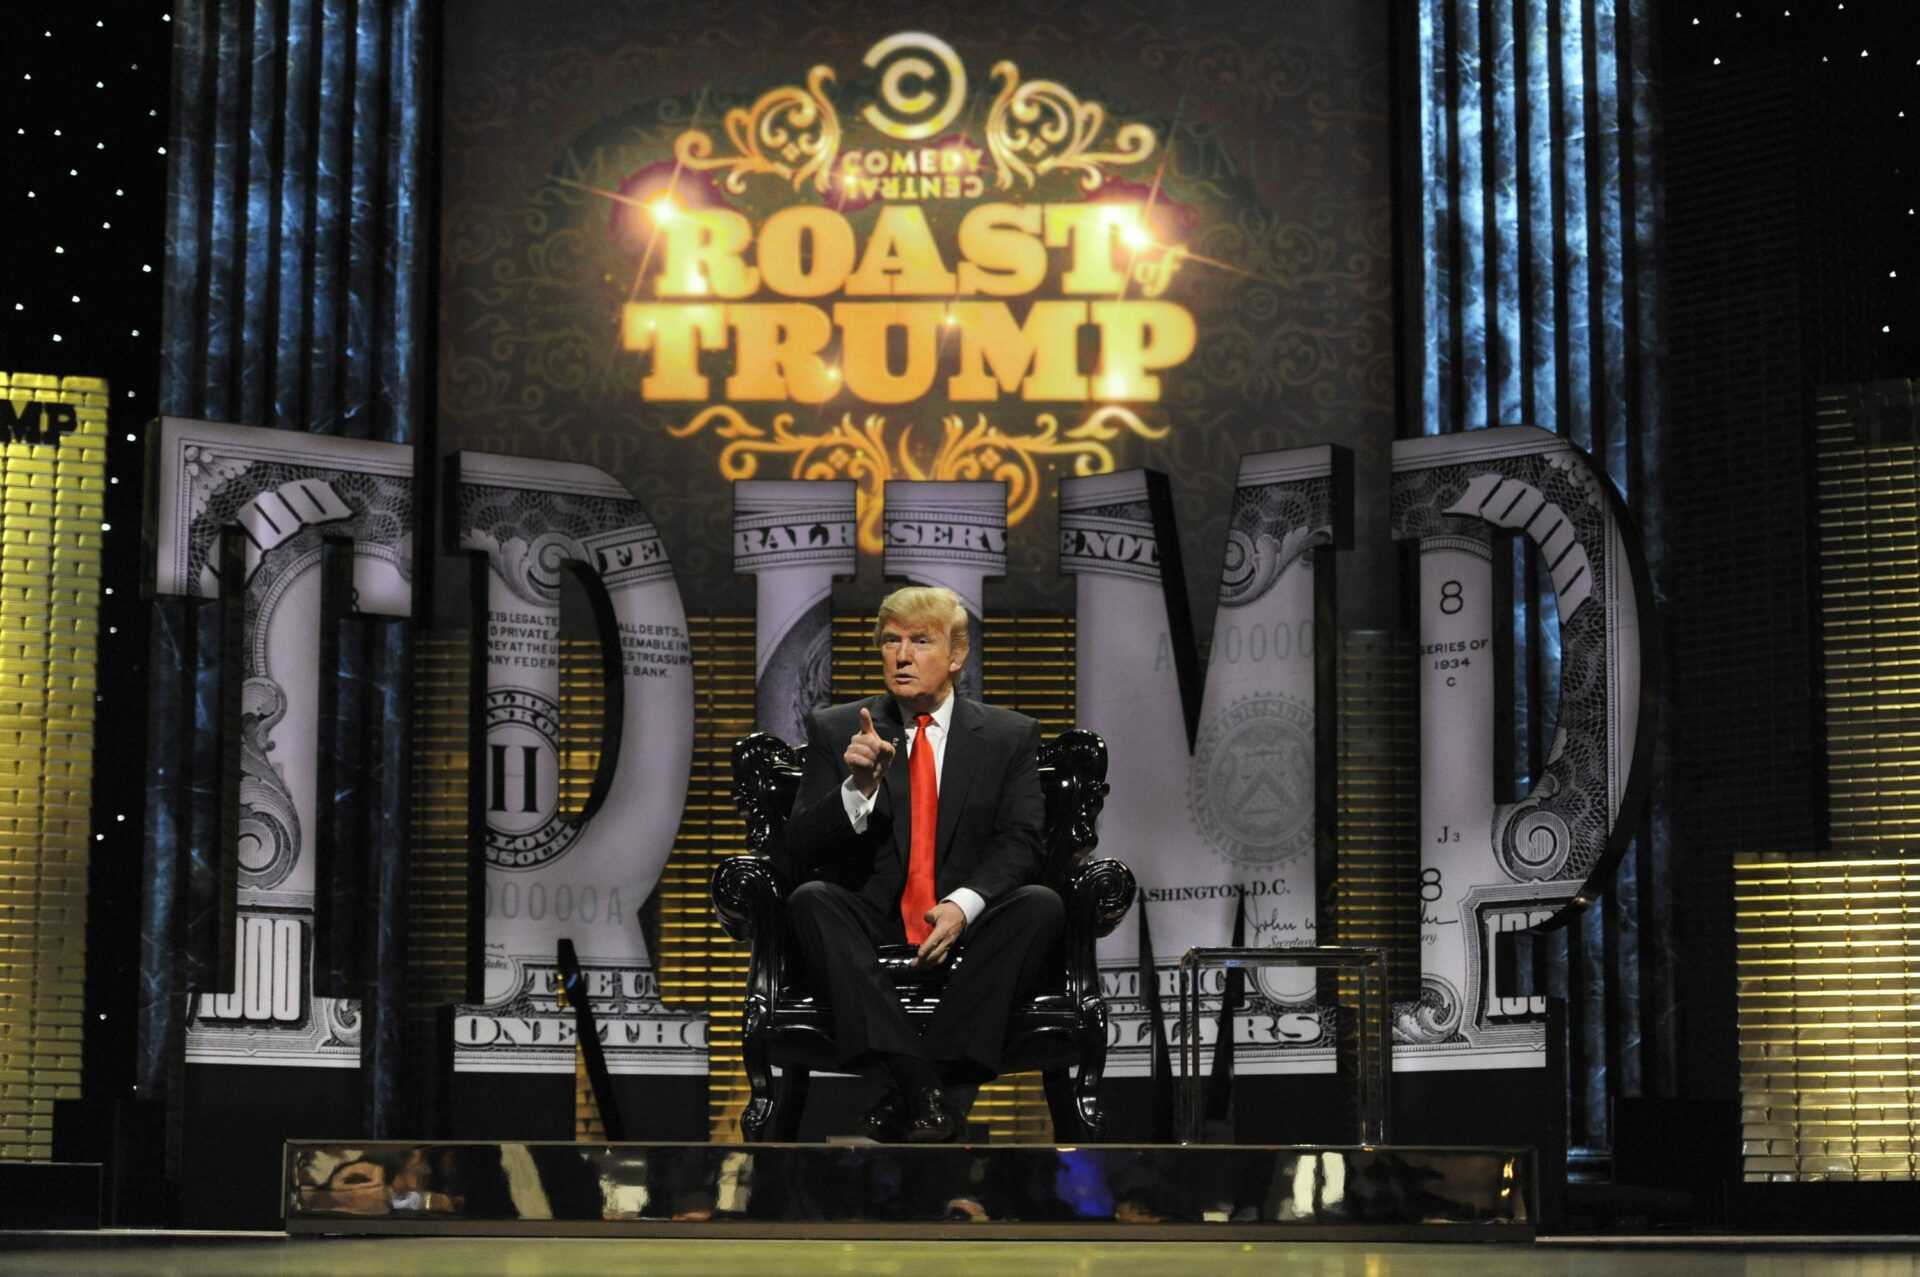 NEW YORK, NY- MARCH 9: Donald Trump appears on the Comedy Central Roast of Donald Trump at Hammerstein Ballroom, March 9, 2011 in New York City. (Photo by Frank Micelotta/PictureGroup)